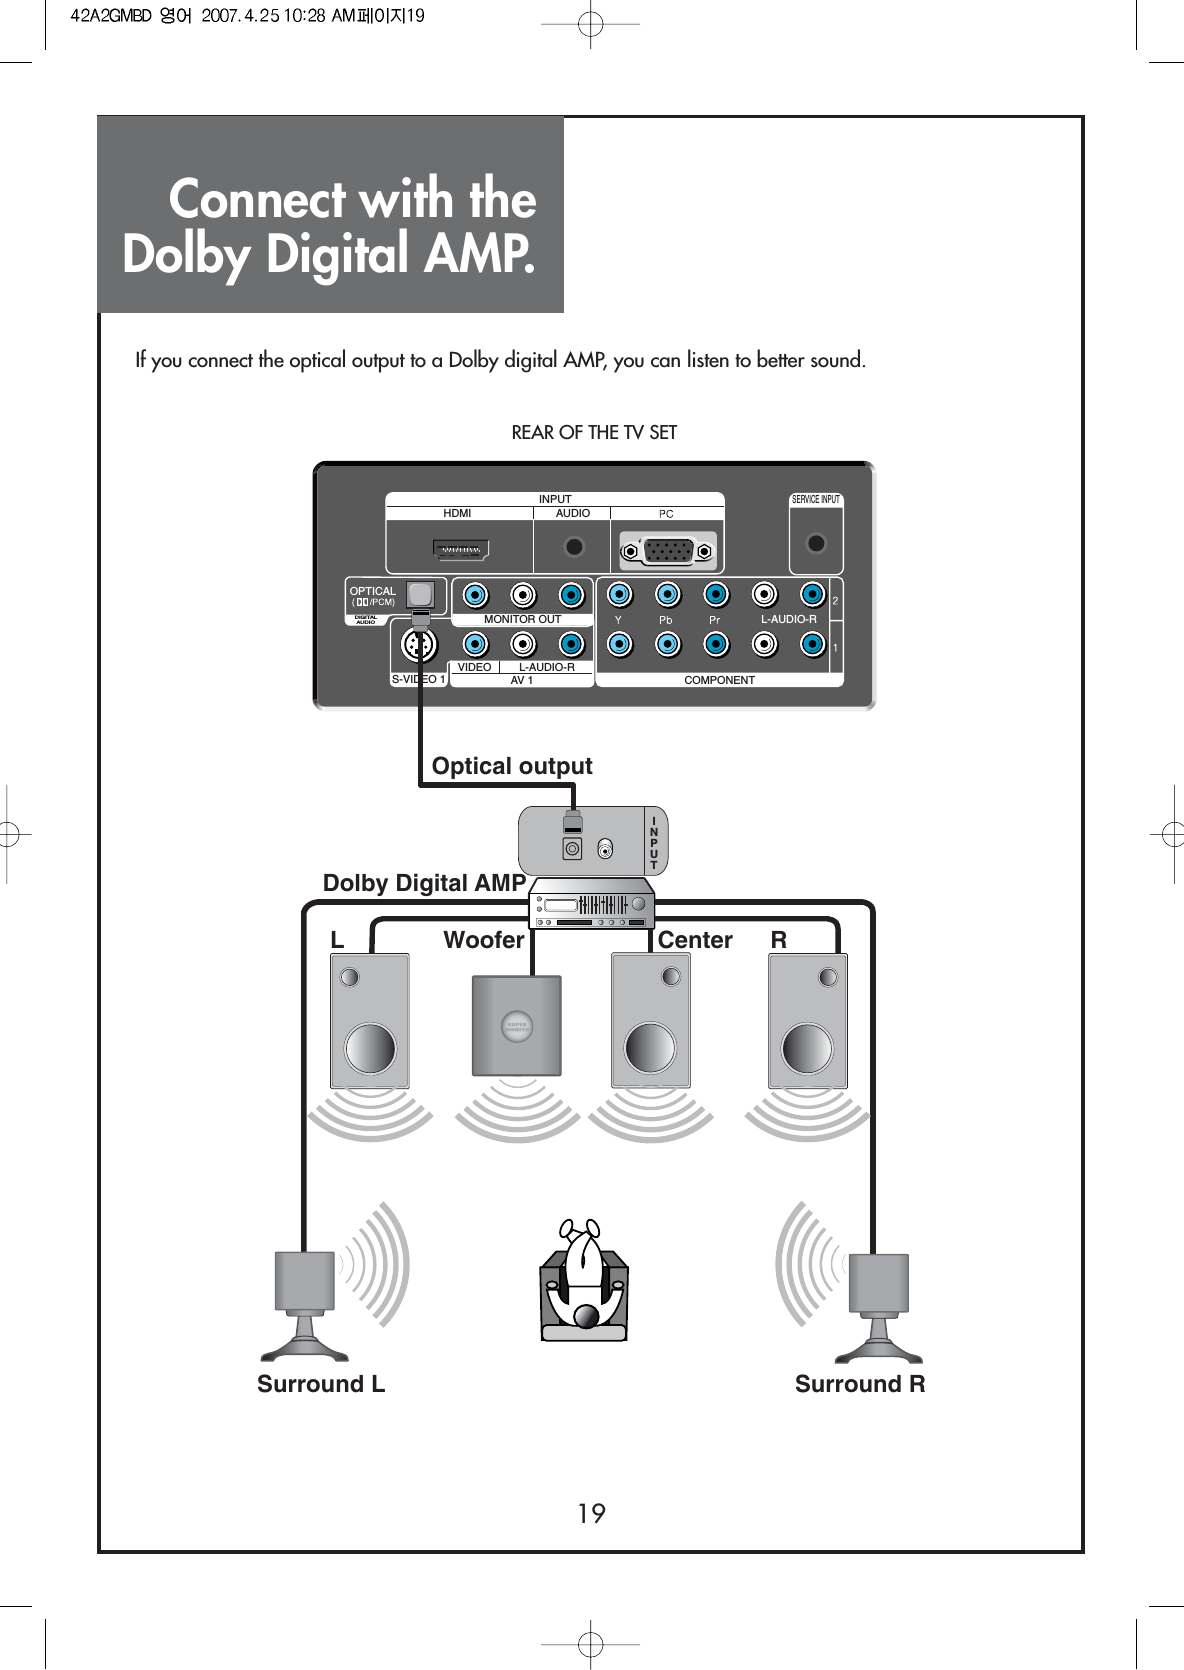 Connect with theDolby Digital AMP.19S-VIDEO 1 AV 1 COMPONENTL-AUDIO-RVIDEO L-AUDIO-RMONITOR OUTDIGITALAUDIOOPTICALAUDIOHDMIINPUTSERVICE INPUTSurround L Surround RRL CenterWooferDolby Digital AMPINPUTOptical outputIf you connect the optical output to a Dolby digital AMP, you can listen to better sound.REAR OF THE TV SET